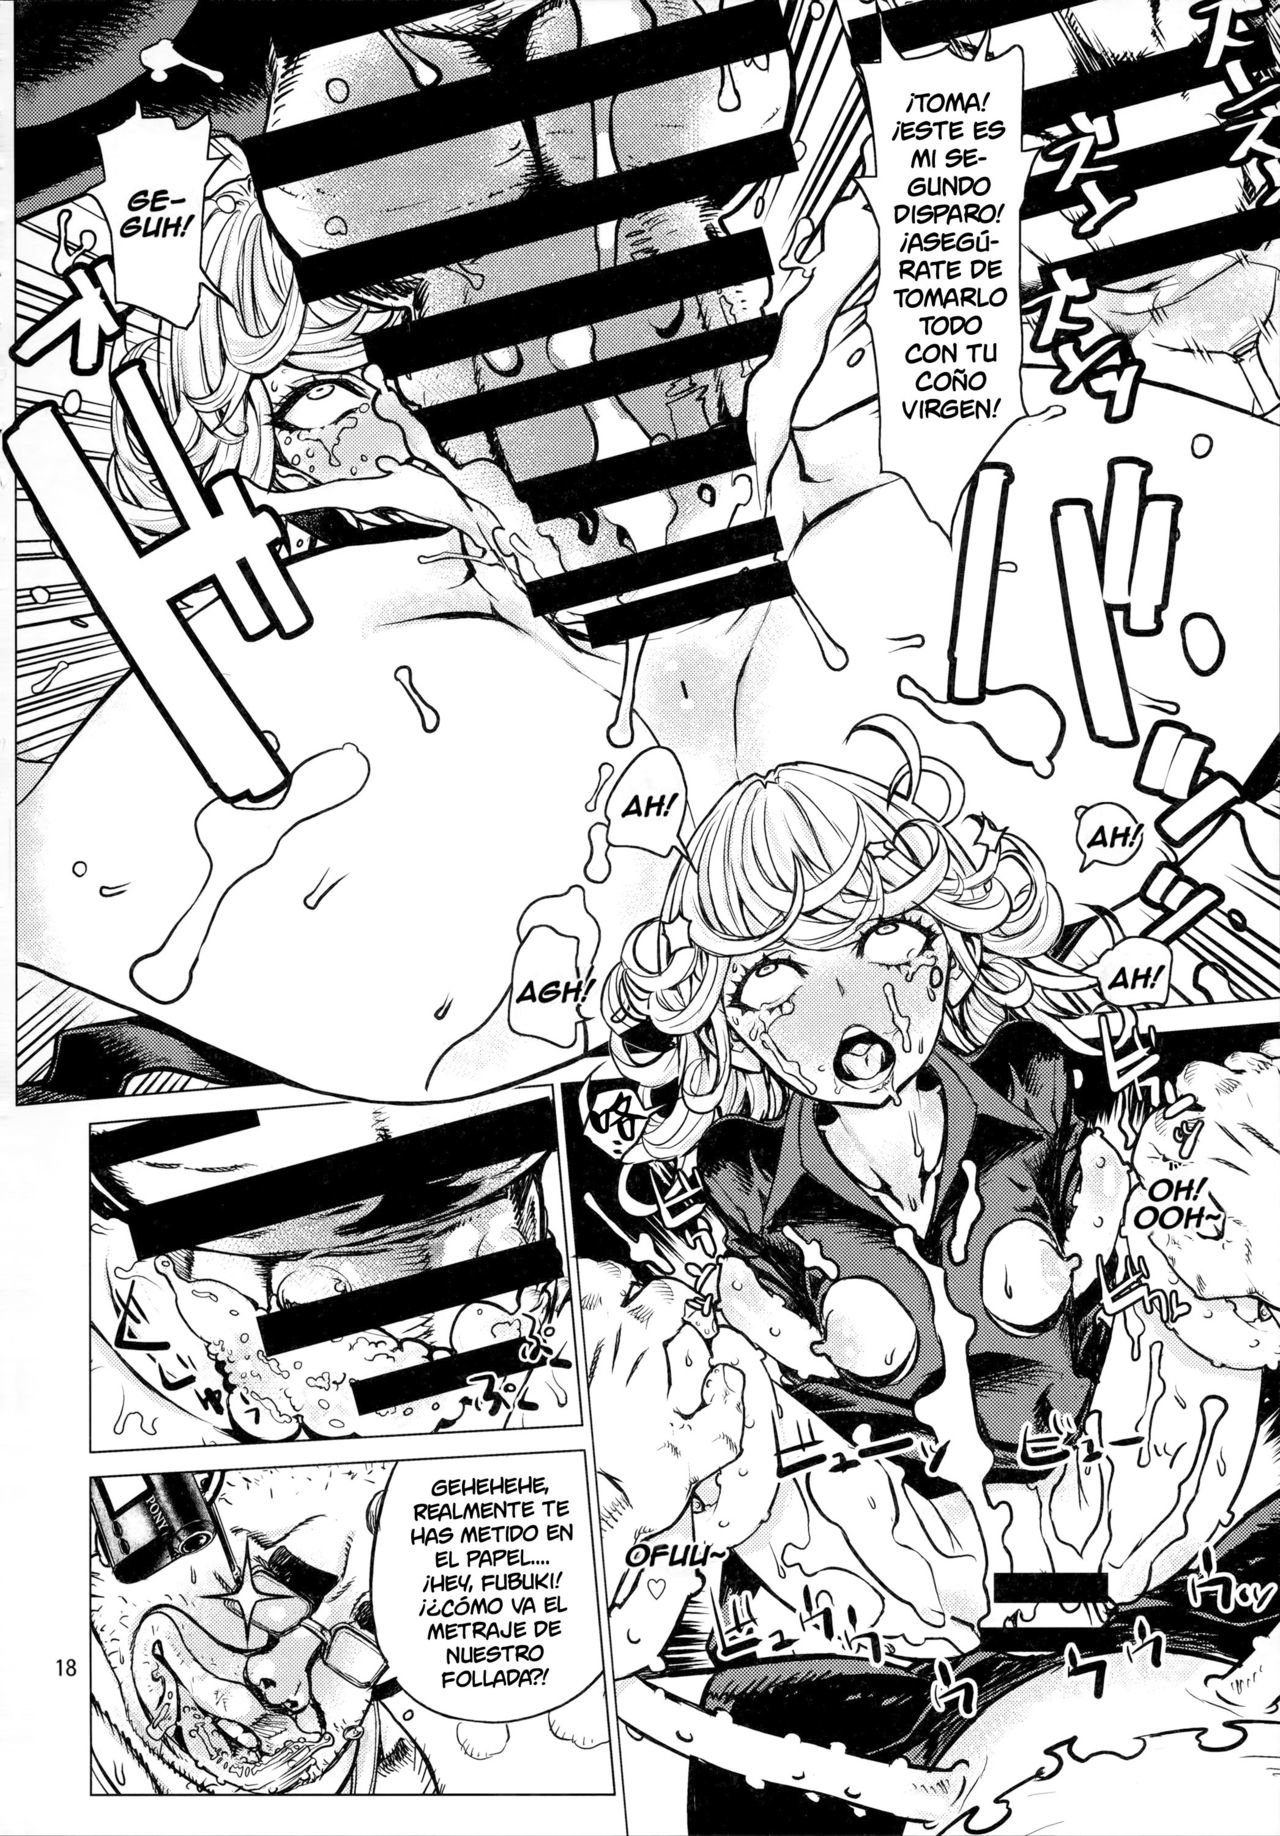 Disaster Sisters Leopard Hon 25 (One Punch Man) [Spanish] [NILG] - 16